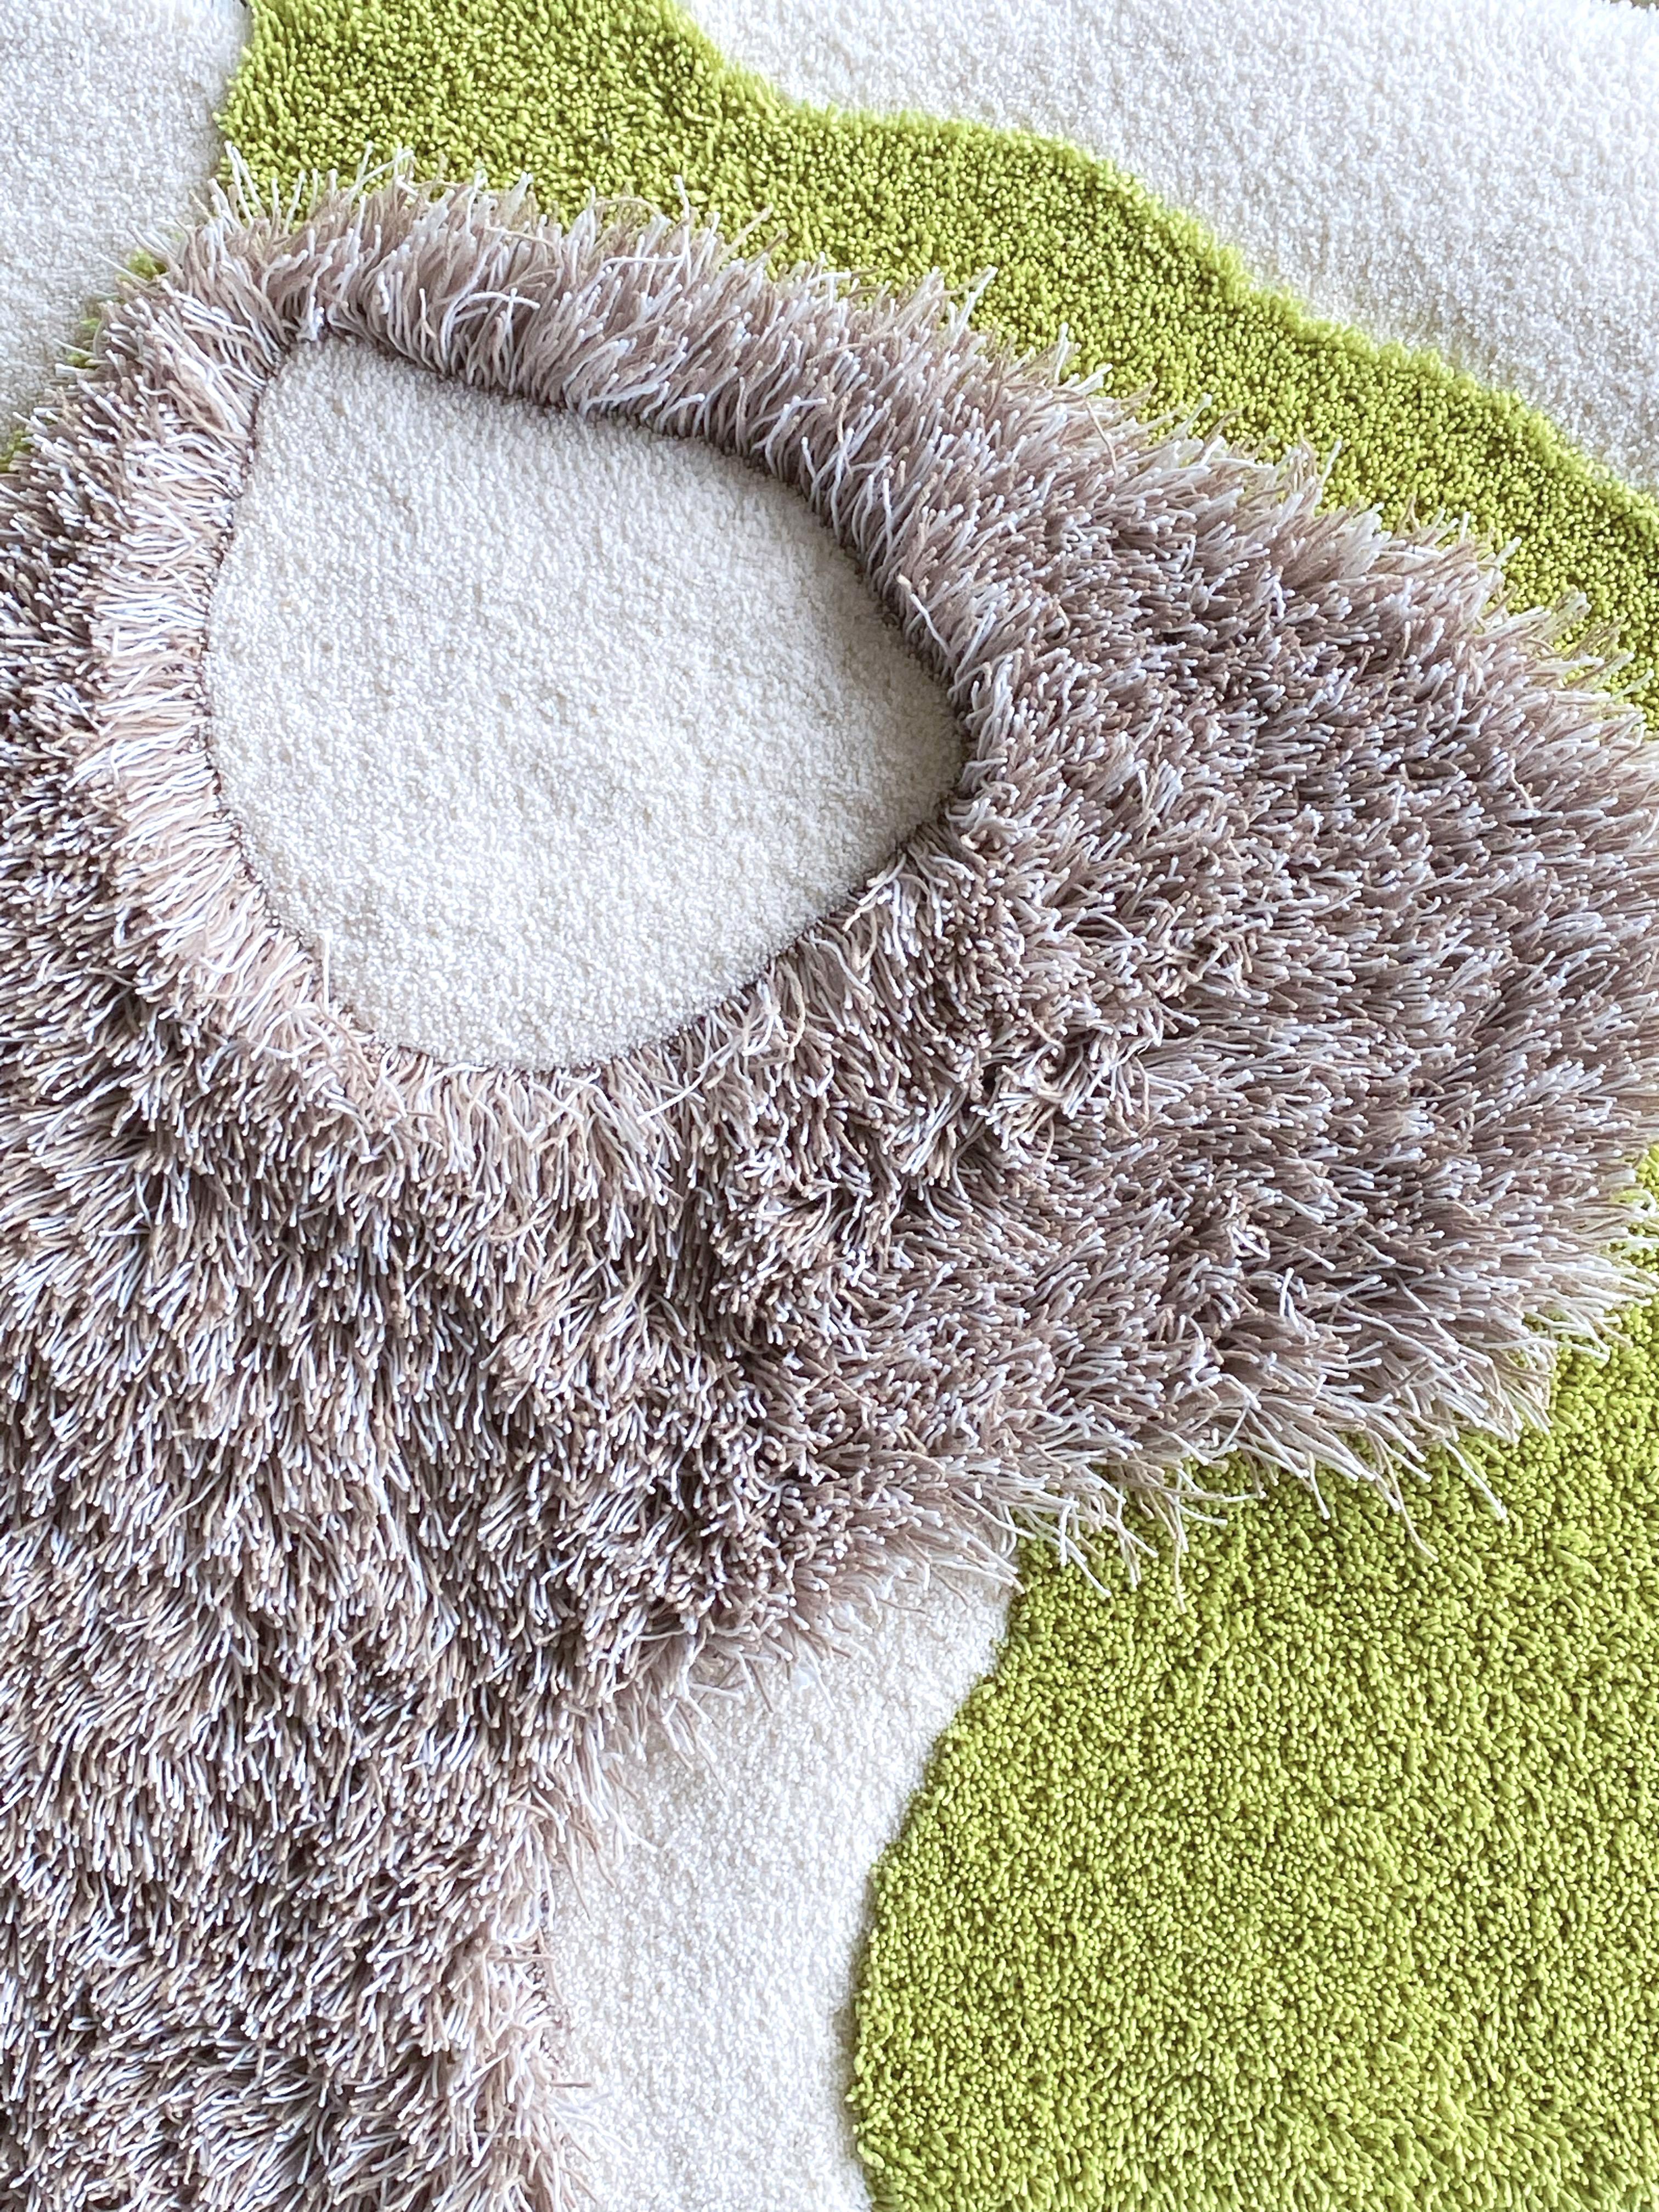 Ro can be used as a wall piece or a rug on the floor.
The piece is hand tufted using abstract forms and cut-out details, made with the idea of dividing the rug into softer areas for sitting. 

The design is a play with texture and softness by using